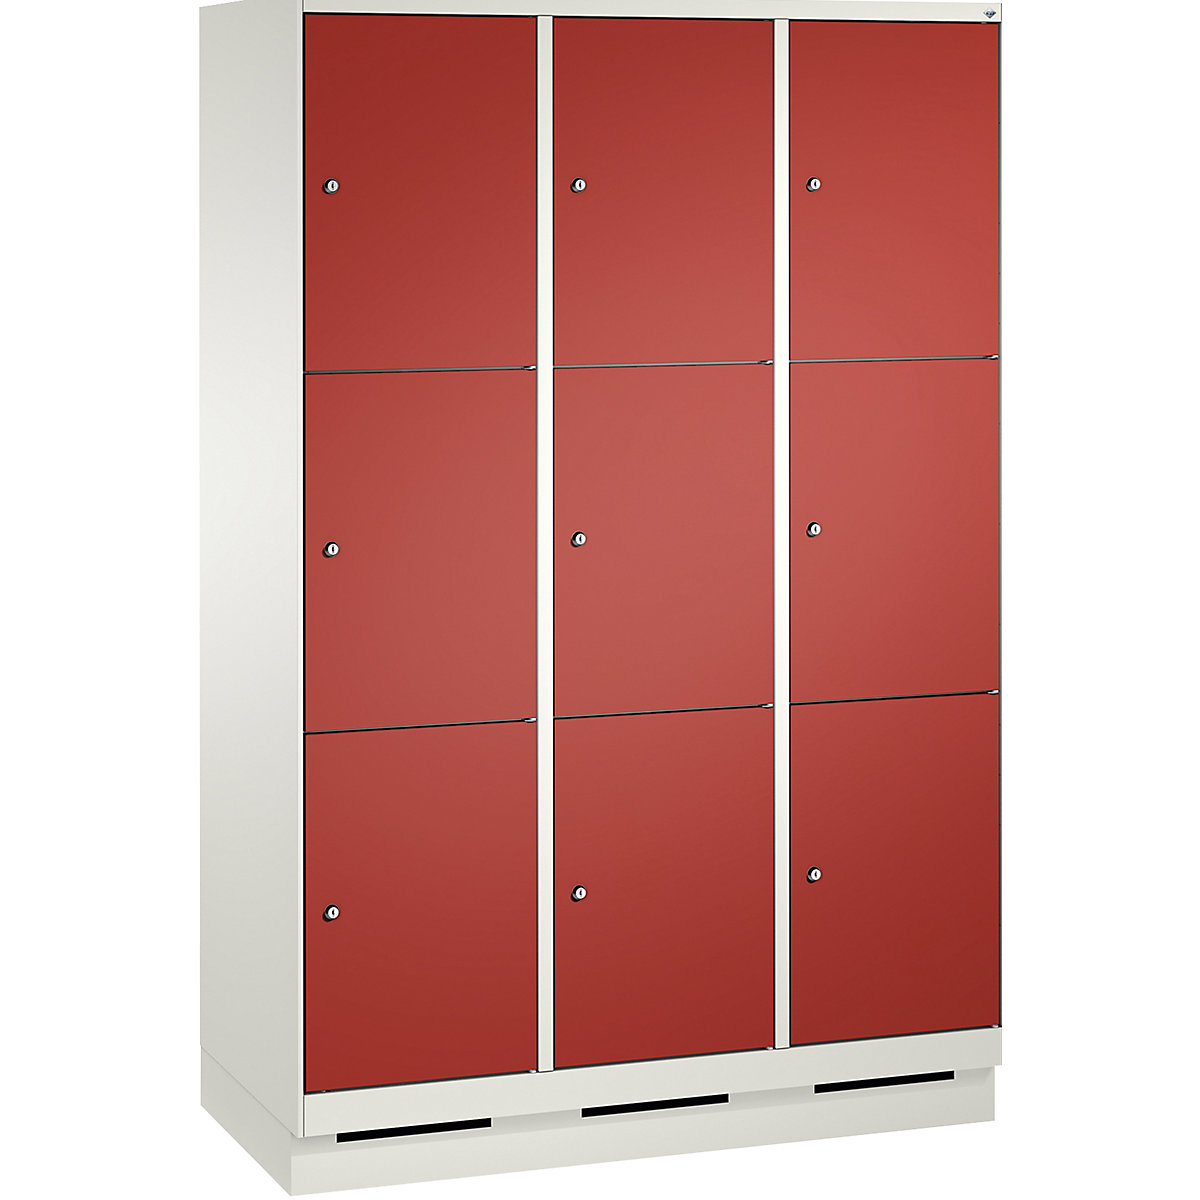 EVOLO locker unit, with plinth – C+P, 3 compartments, 3 shelf compartments each, compartment width 400 mm, traffic white / flame red-5